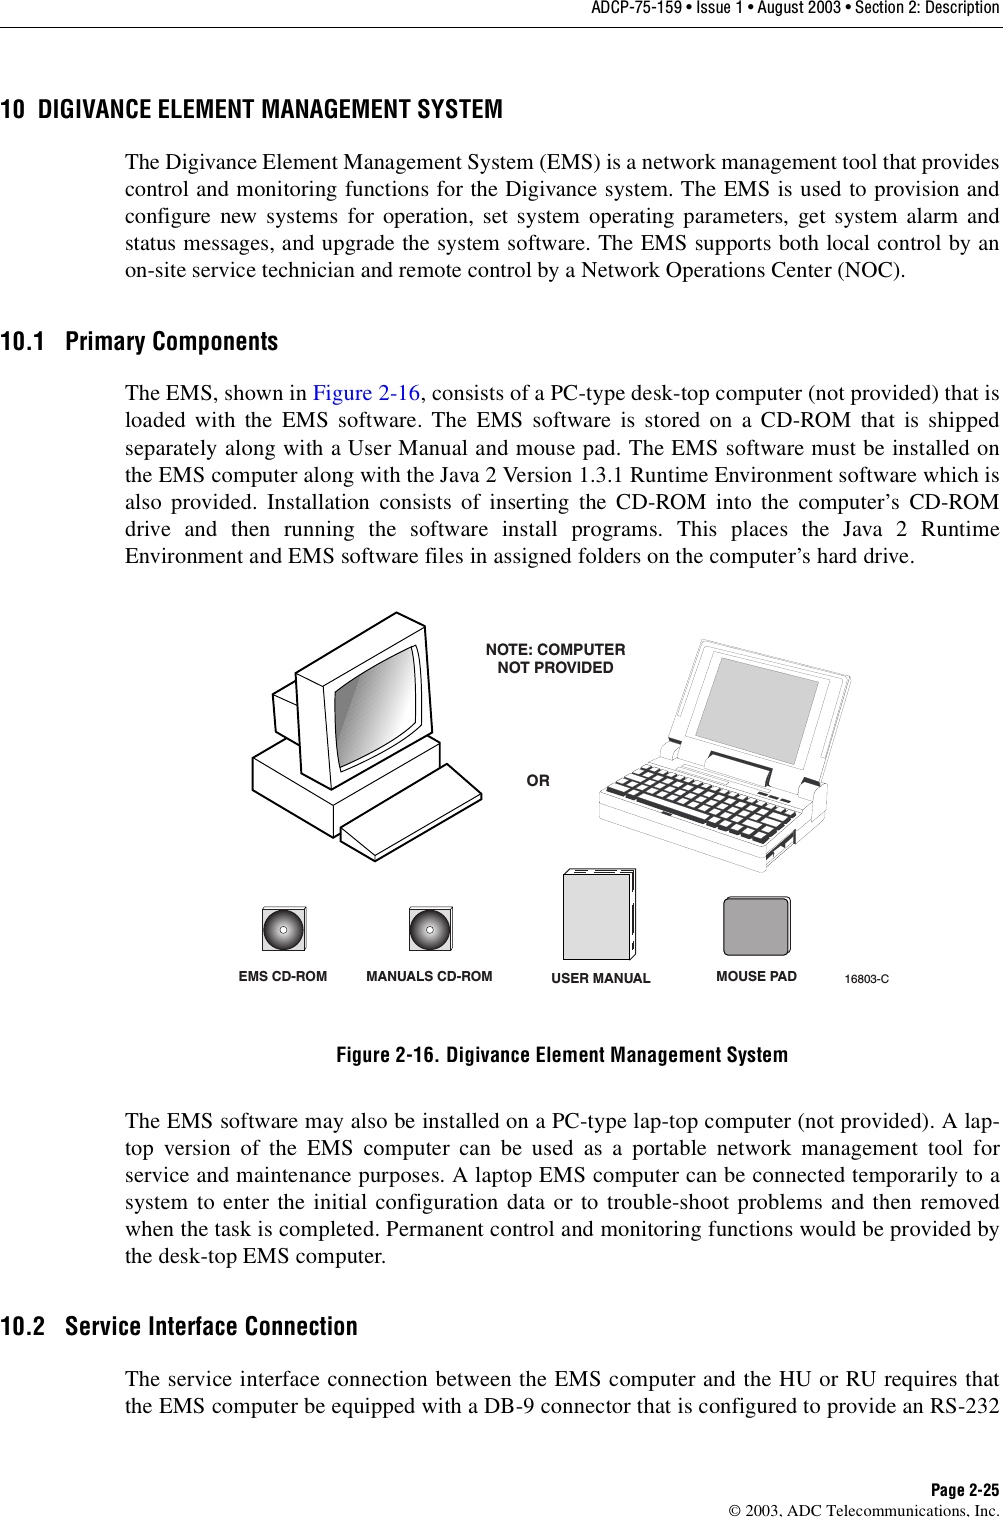 ADCP-75-159 • Issue 1 • August 2003 • Section 2: DescriptionPage 2-25© 2003, ADC Telecommunications, Inc.10 DIGIVANCE ELEMENT MANAGEMENT SYSTEMThe Digivance Element Management System (EMS) is a network management tool that providescontrol and monitoring functions for the Digivance system. The EMS is used to provision andconfigure new systems for operation, set system operating parameters, get system alarm andstatus messages, and upgrade the system software. The EMS supports both local control by anon-site service technician and remote control by a Network Operations Center (NOC). 10.1 Primary ComponentsThe EMS, shown in Figure 2-16, consists of a PC-type desk-top computer (not provided) that isloaded with the EMS software. The EMS software is stored on a CD-ROM that is shippedseparately along with a User Manual and mouse pad. The EMS software must be installed onthe EMS computer along with the Java 2 Version 1.3.1 Runtime Environment software which isalso provided. Installation consists of inserting the CD-ROM into the computer’s CD-ROMdrive and then running the software install programs. This places the Java 2 RuntimeEnvironment and EMS software files in assigned folders on the computer’s hard drive. Figure 2-16. Digivance Element Management SystemThe EMS software may also be installed on a PC-type lap-top computer (not provided). A lap-top version of the EMS computer can be used as a portable network management tool forservice and maintenance purposes. A laptop EMS computer can be connected temporarily to asystem to enter the initial configuration data or to trouble-shoot problems and then removedwhen the task is completed. Permanent control and monitoring functions would be provided bythe desk-top EMS computer. 10.2 Service Interface ConnectionThe service interface connection between the EMS computer and the HU or RU requires thatthe EMS computer be equipped with a DB-9 connector that is configured to provide an RS-232EMS CD-ROM MANUALS CD-ROMORNOTE: COMPUTERNOT PROVIDED16803-CUSER MANUAL MOUSE PAD